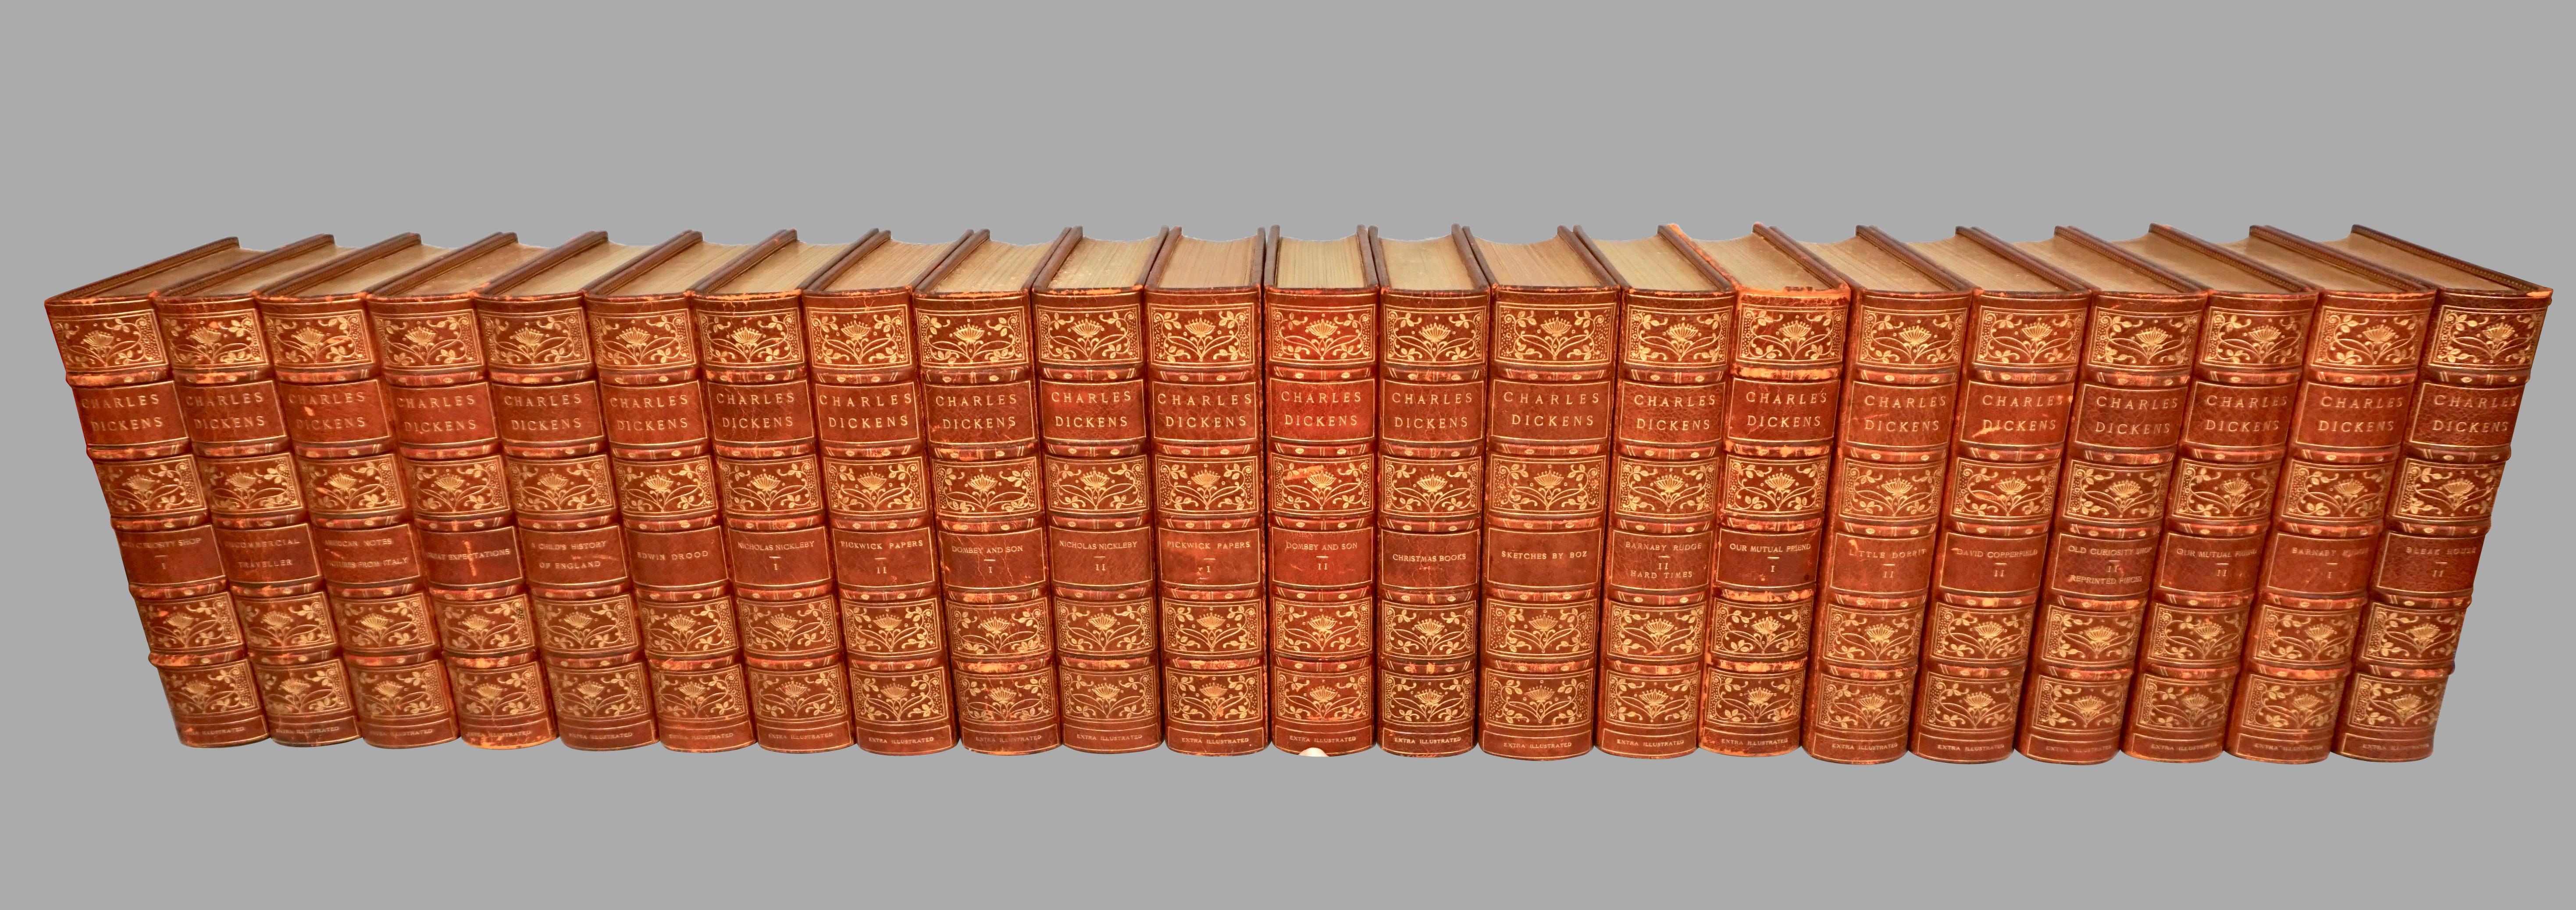 Complete Works of Dickens Autograph Edition in 30 Gilt-Tooled Leather Volumes 4